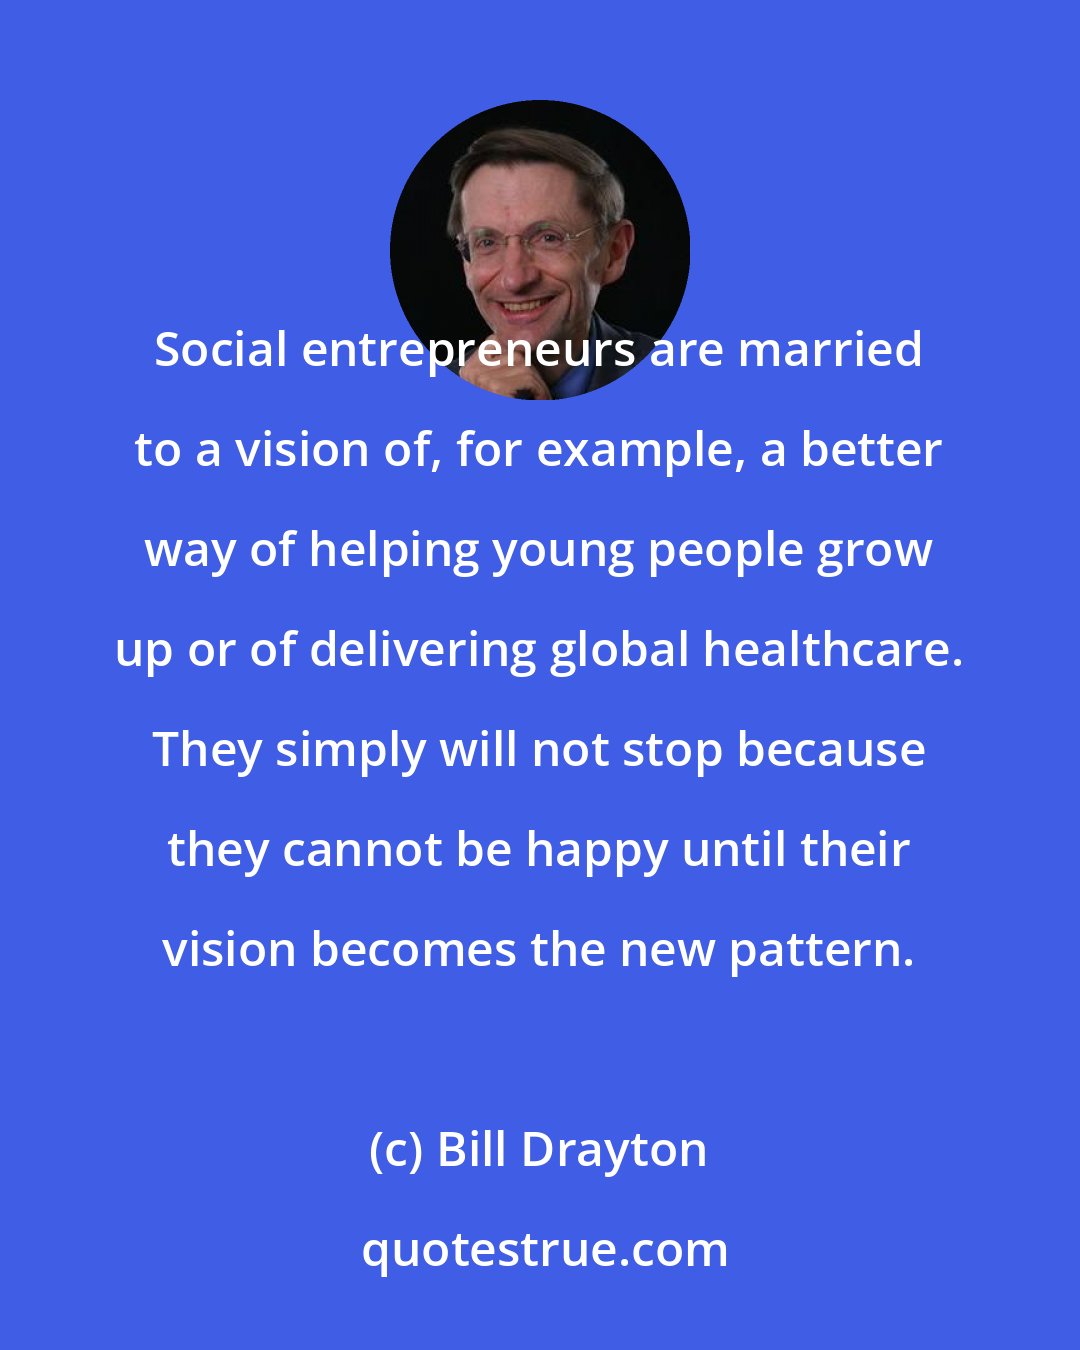 Bill Drayton: Social entrepreneurs are married to a vision of, for example, a better way of helping young people grow up or of delivering global healthcare. They simply will not stop because they cannot be happy until their vision becomes the new pattern.